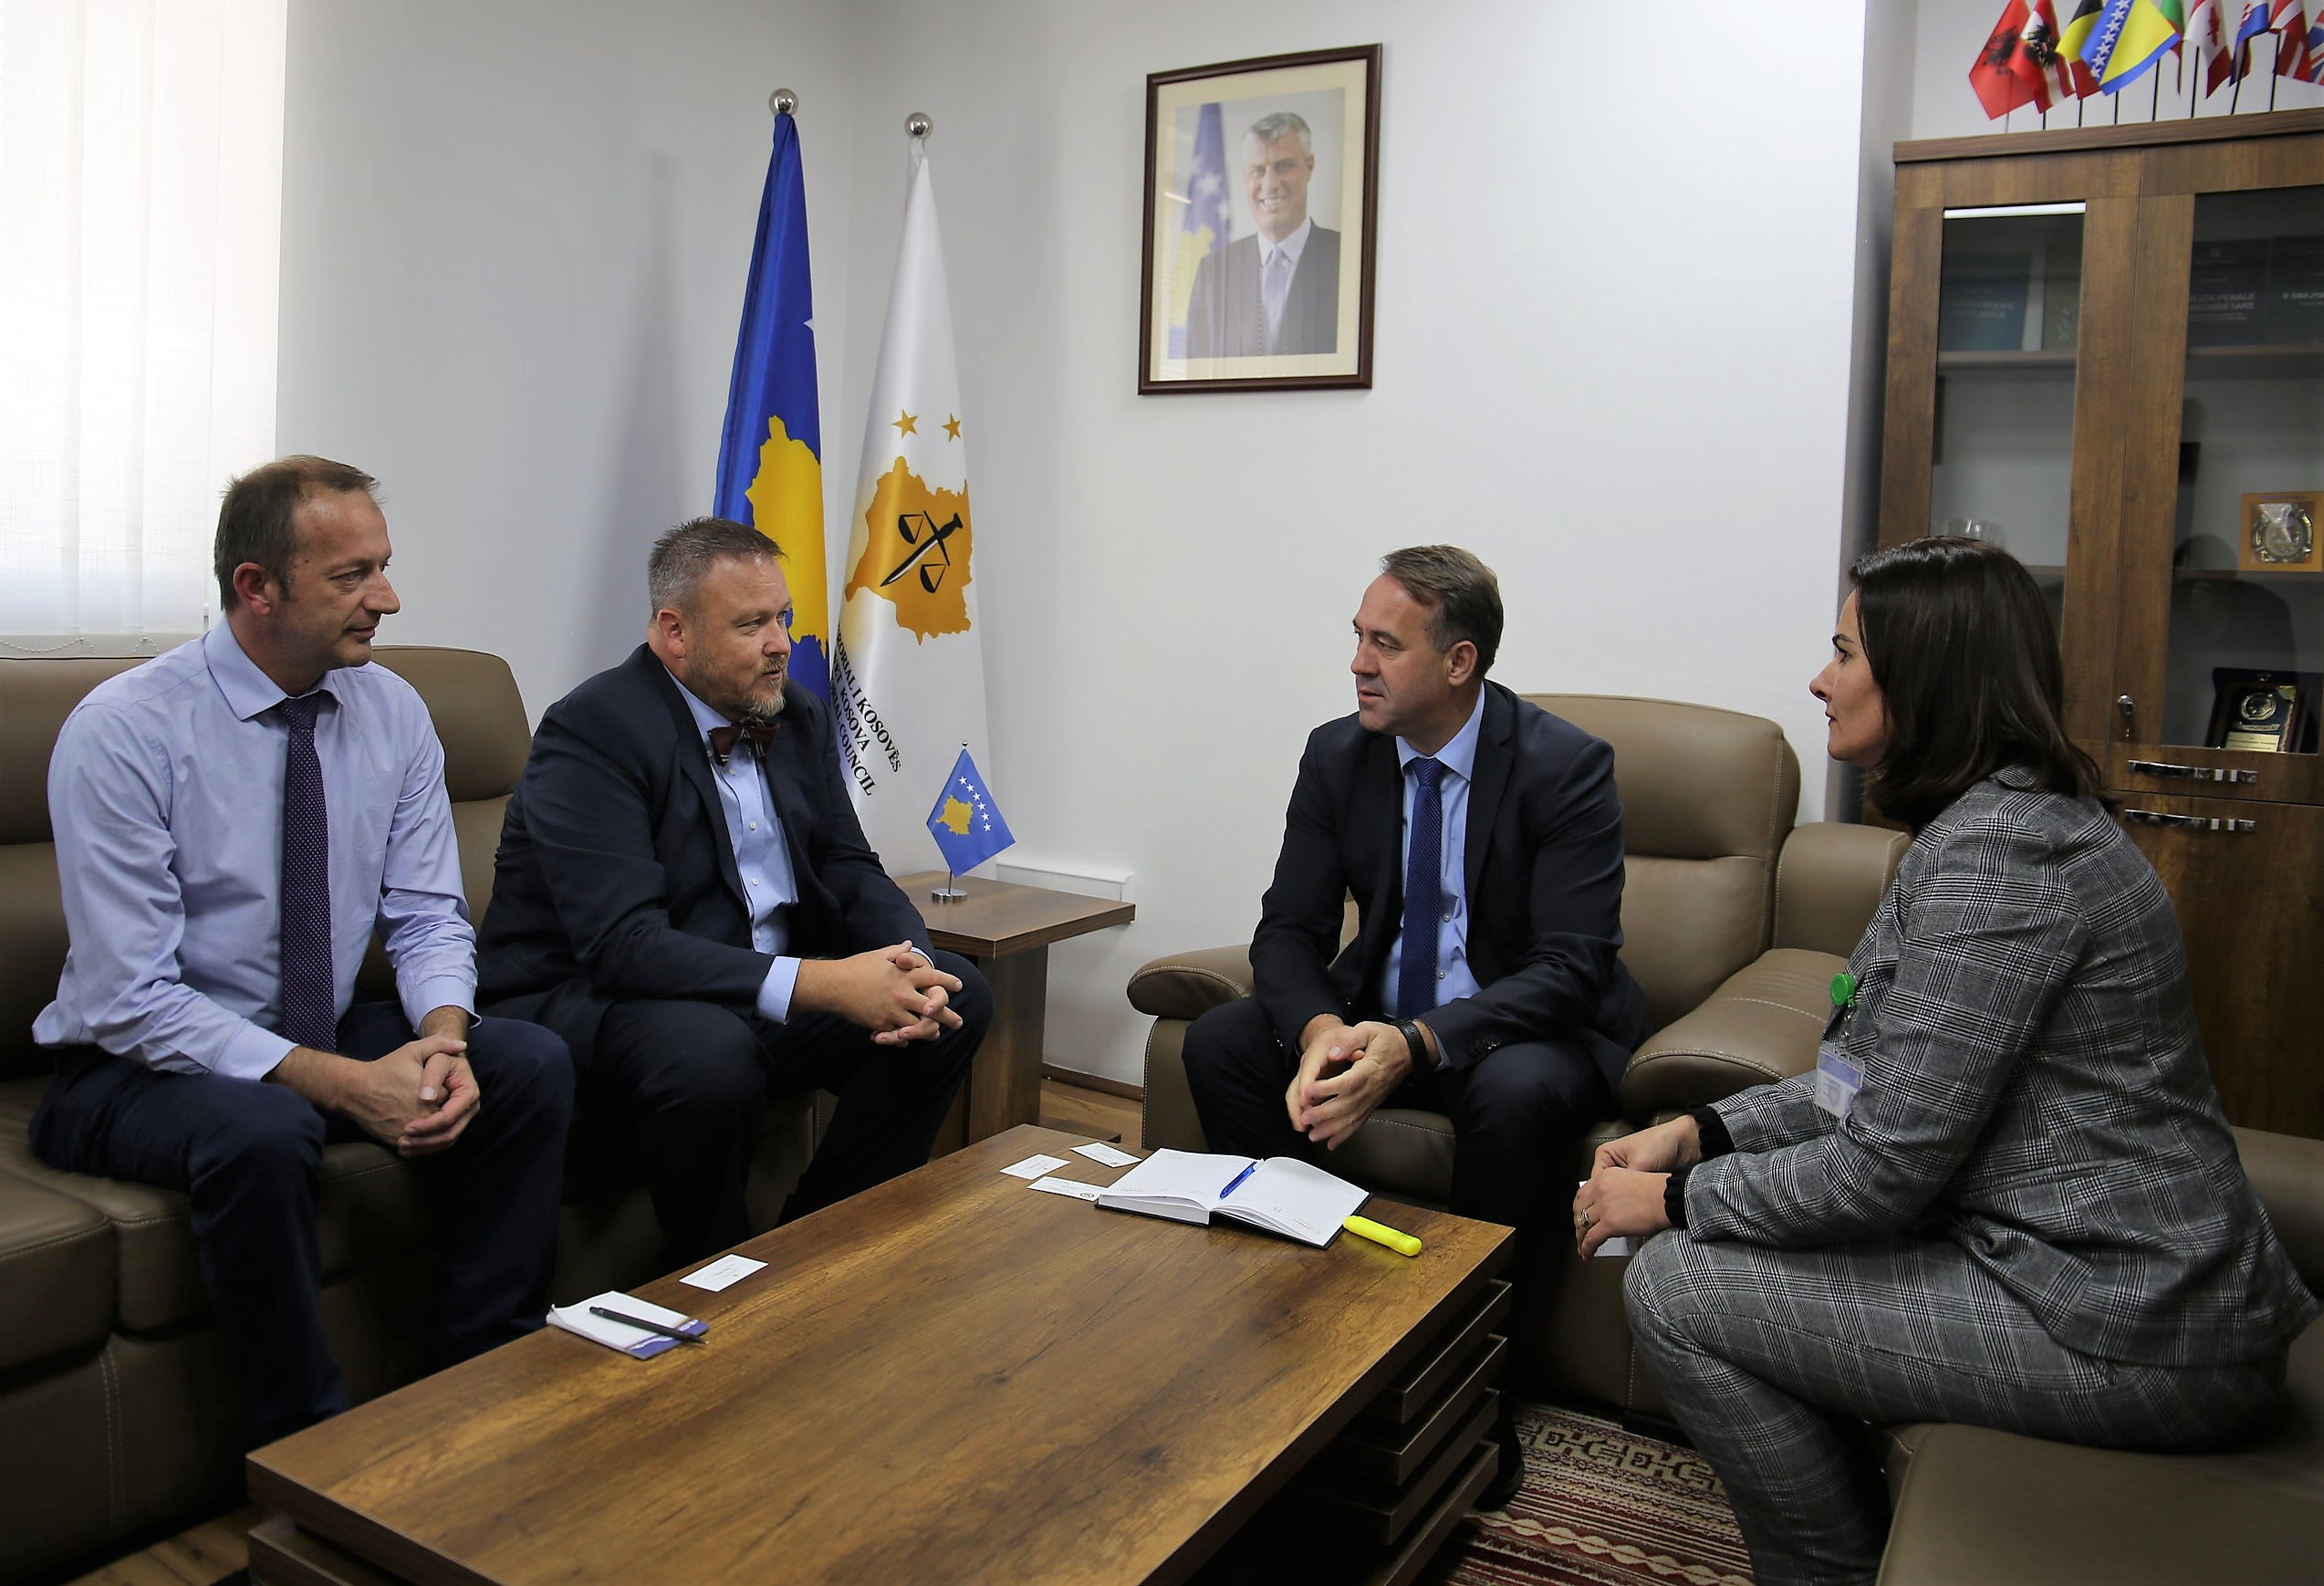 Chairman Hyseni appreciates US support for the prosecutorial system